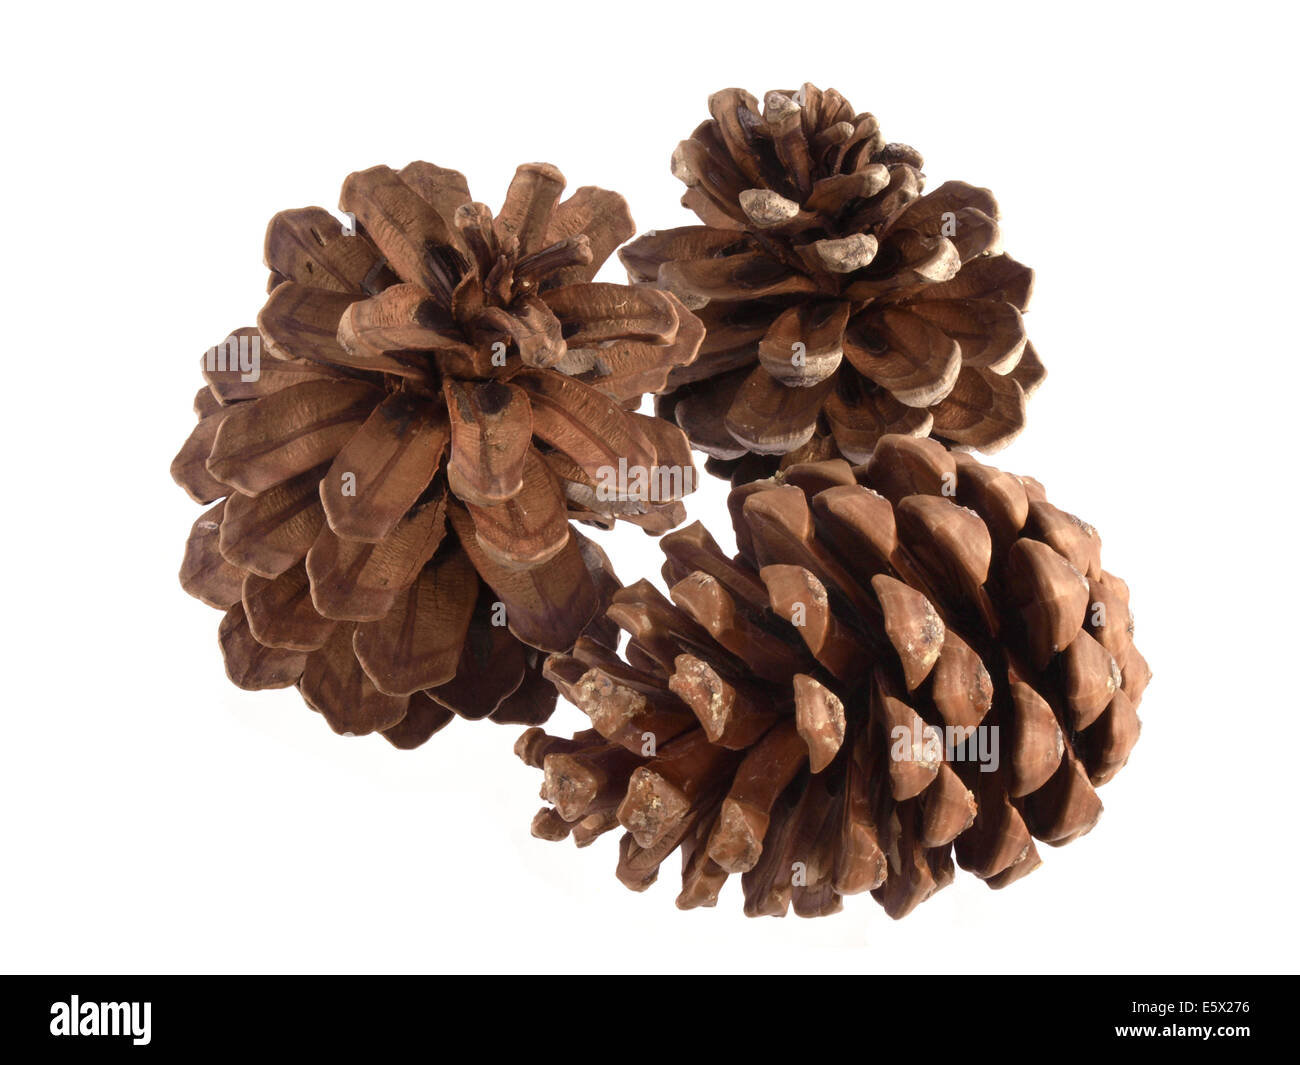 Pine or fir cones on a white background. Stock Photo